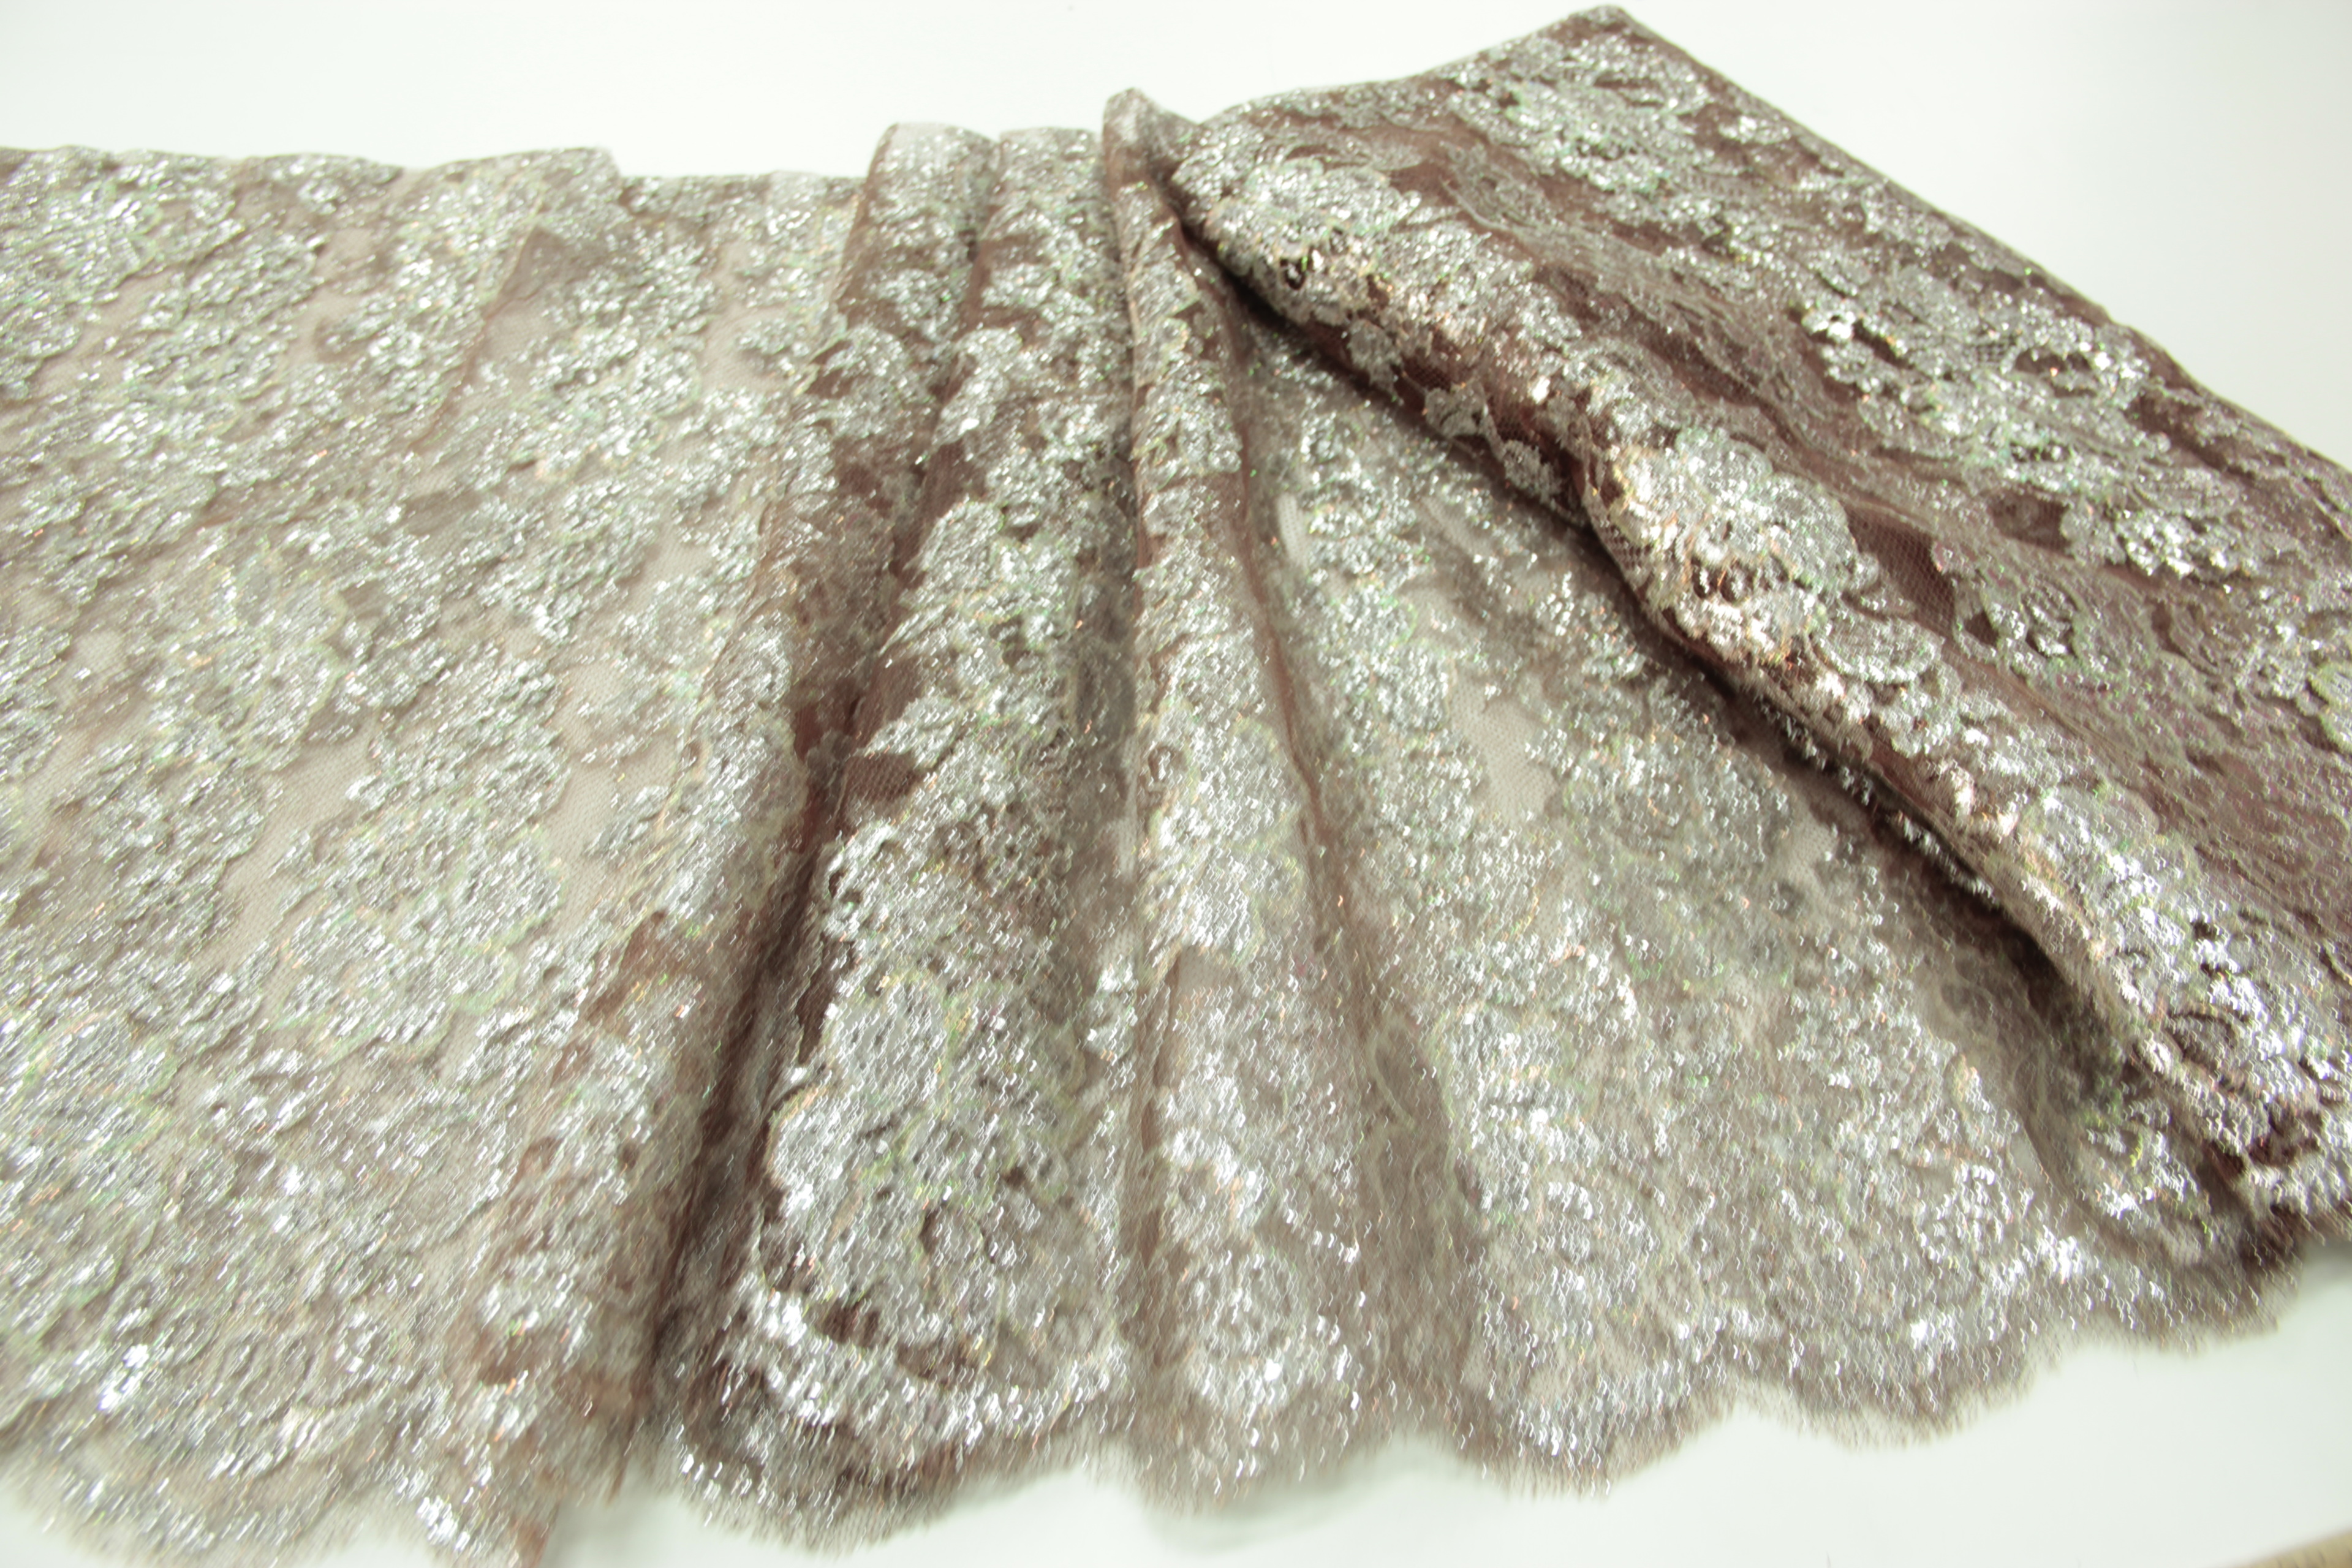 Haute couture gold Chantilly lace, France, $98/yd